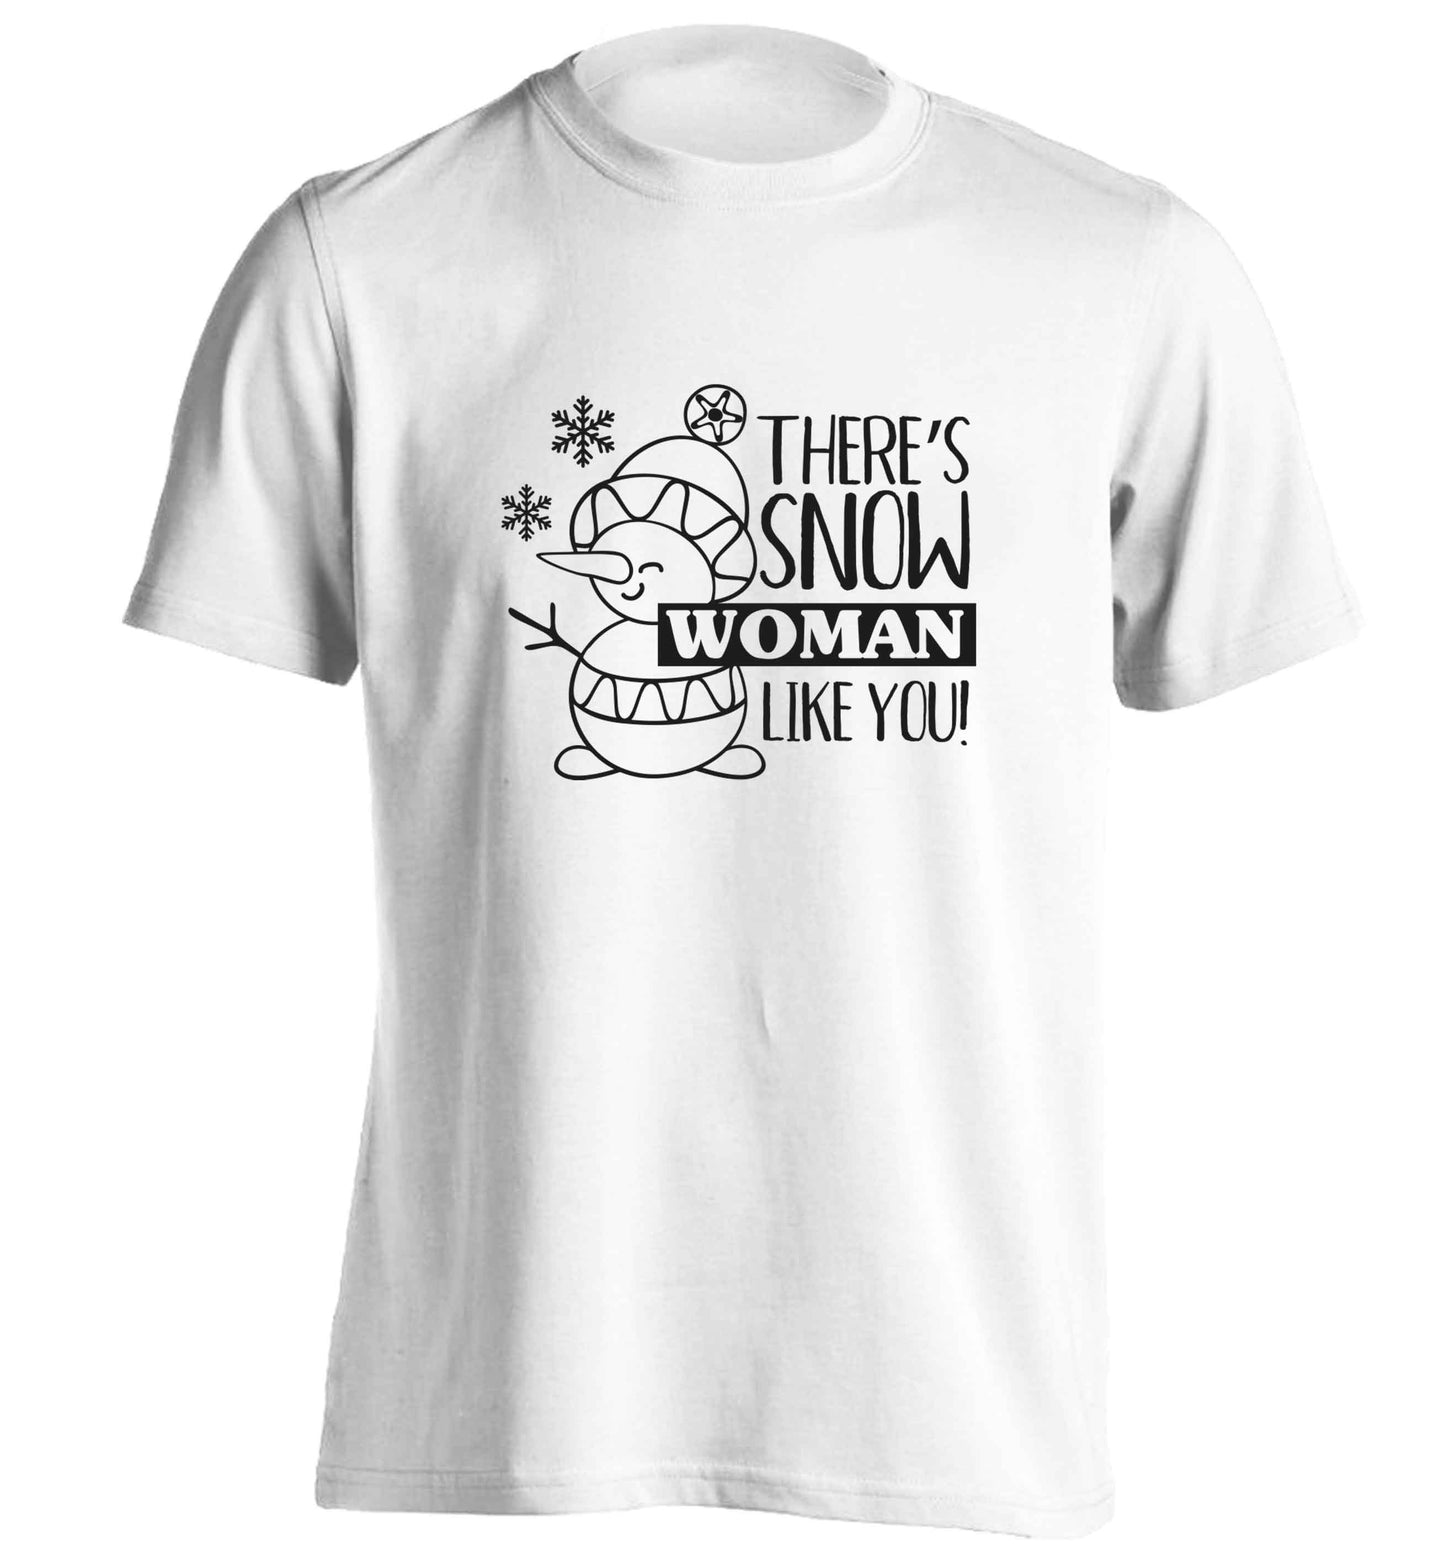 There's snow woman like you adults unisex white Tshirt 2XL